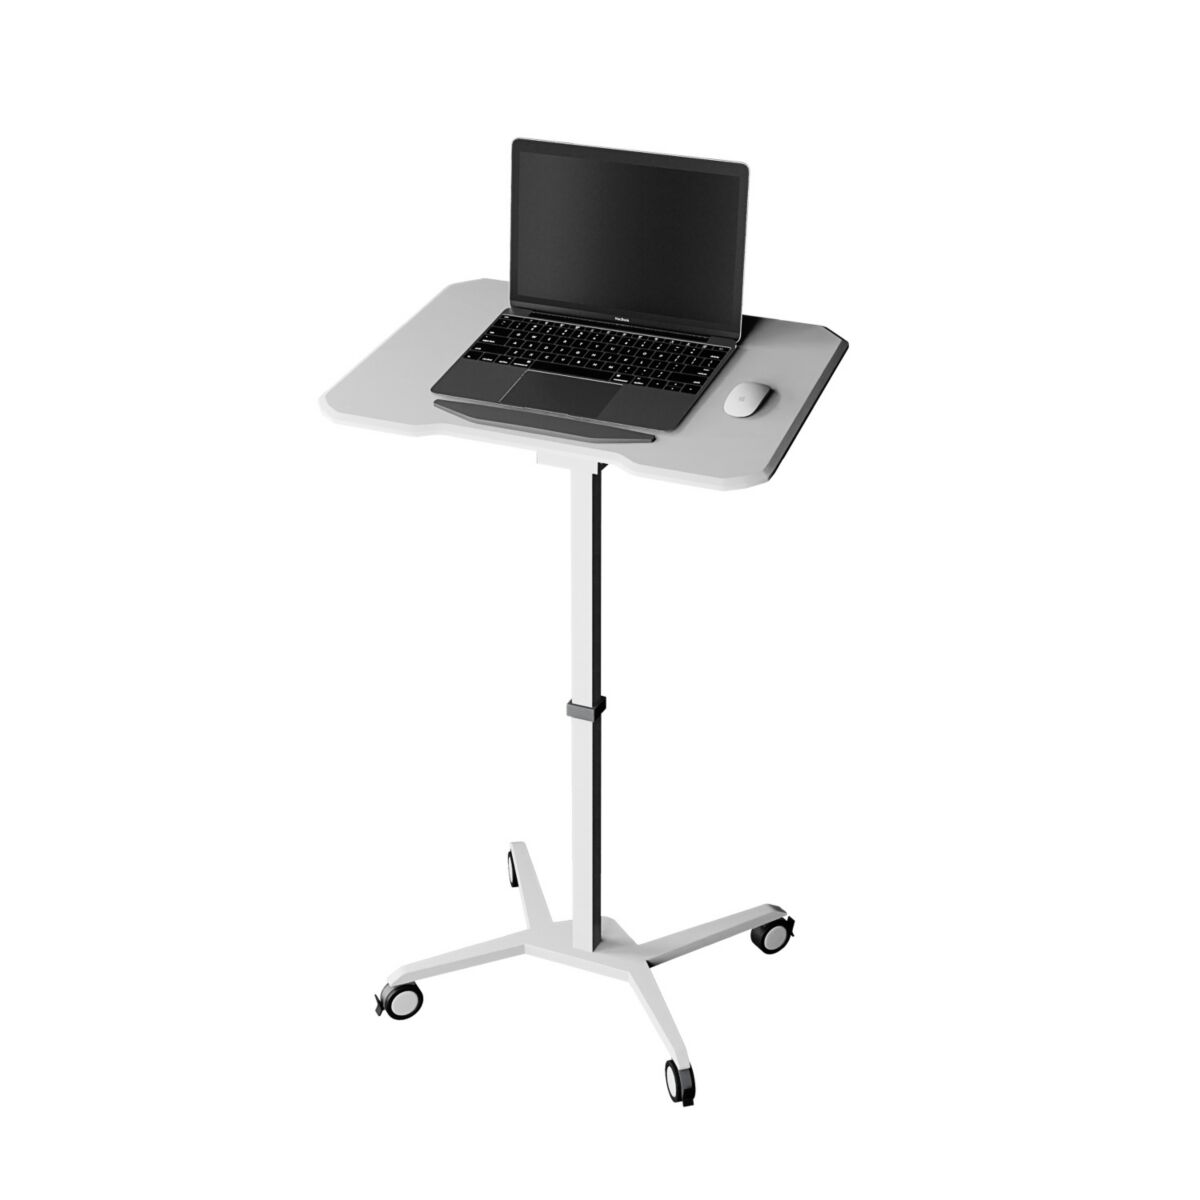 Simplie Fun White Sit to Stand Mobile Laptop Computer Stand with Height Adjustable and Tiltable Table Top - White